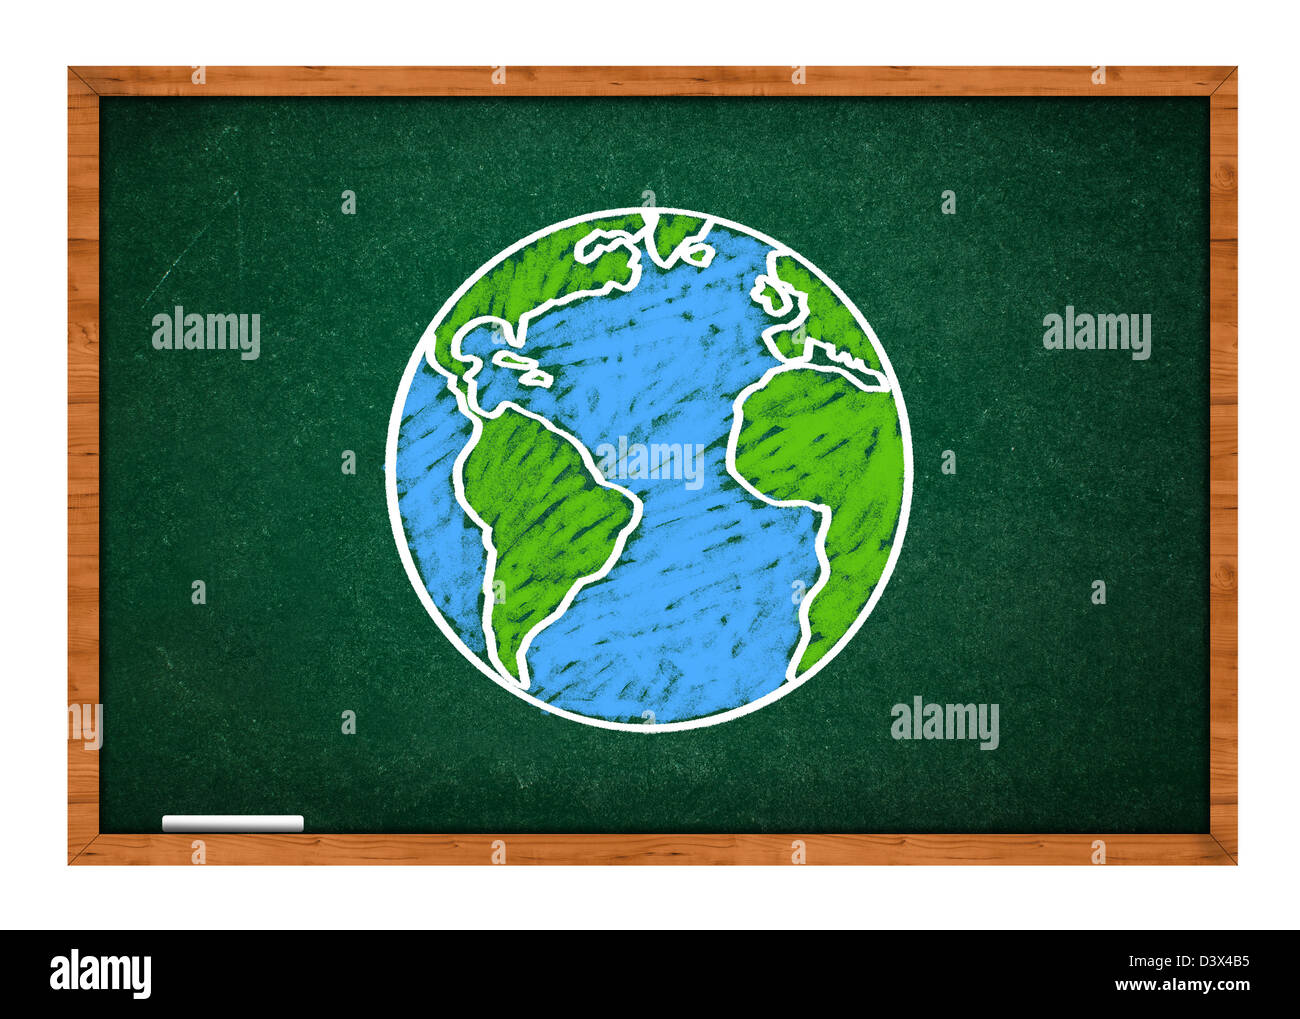 Drawing of planet Earth on a green school chalkboard, geography class concept. Stock Photo